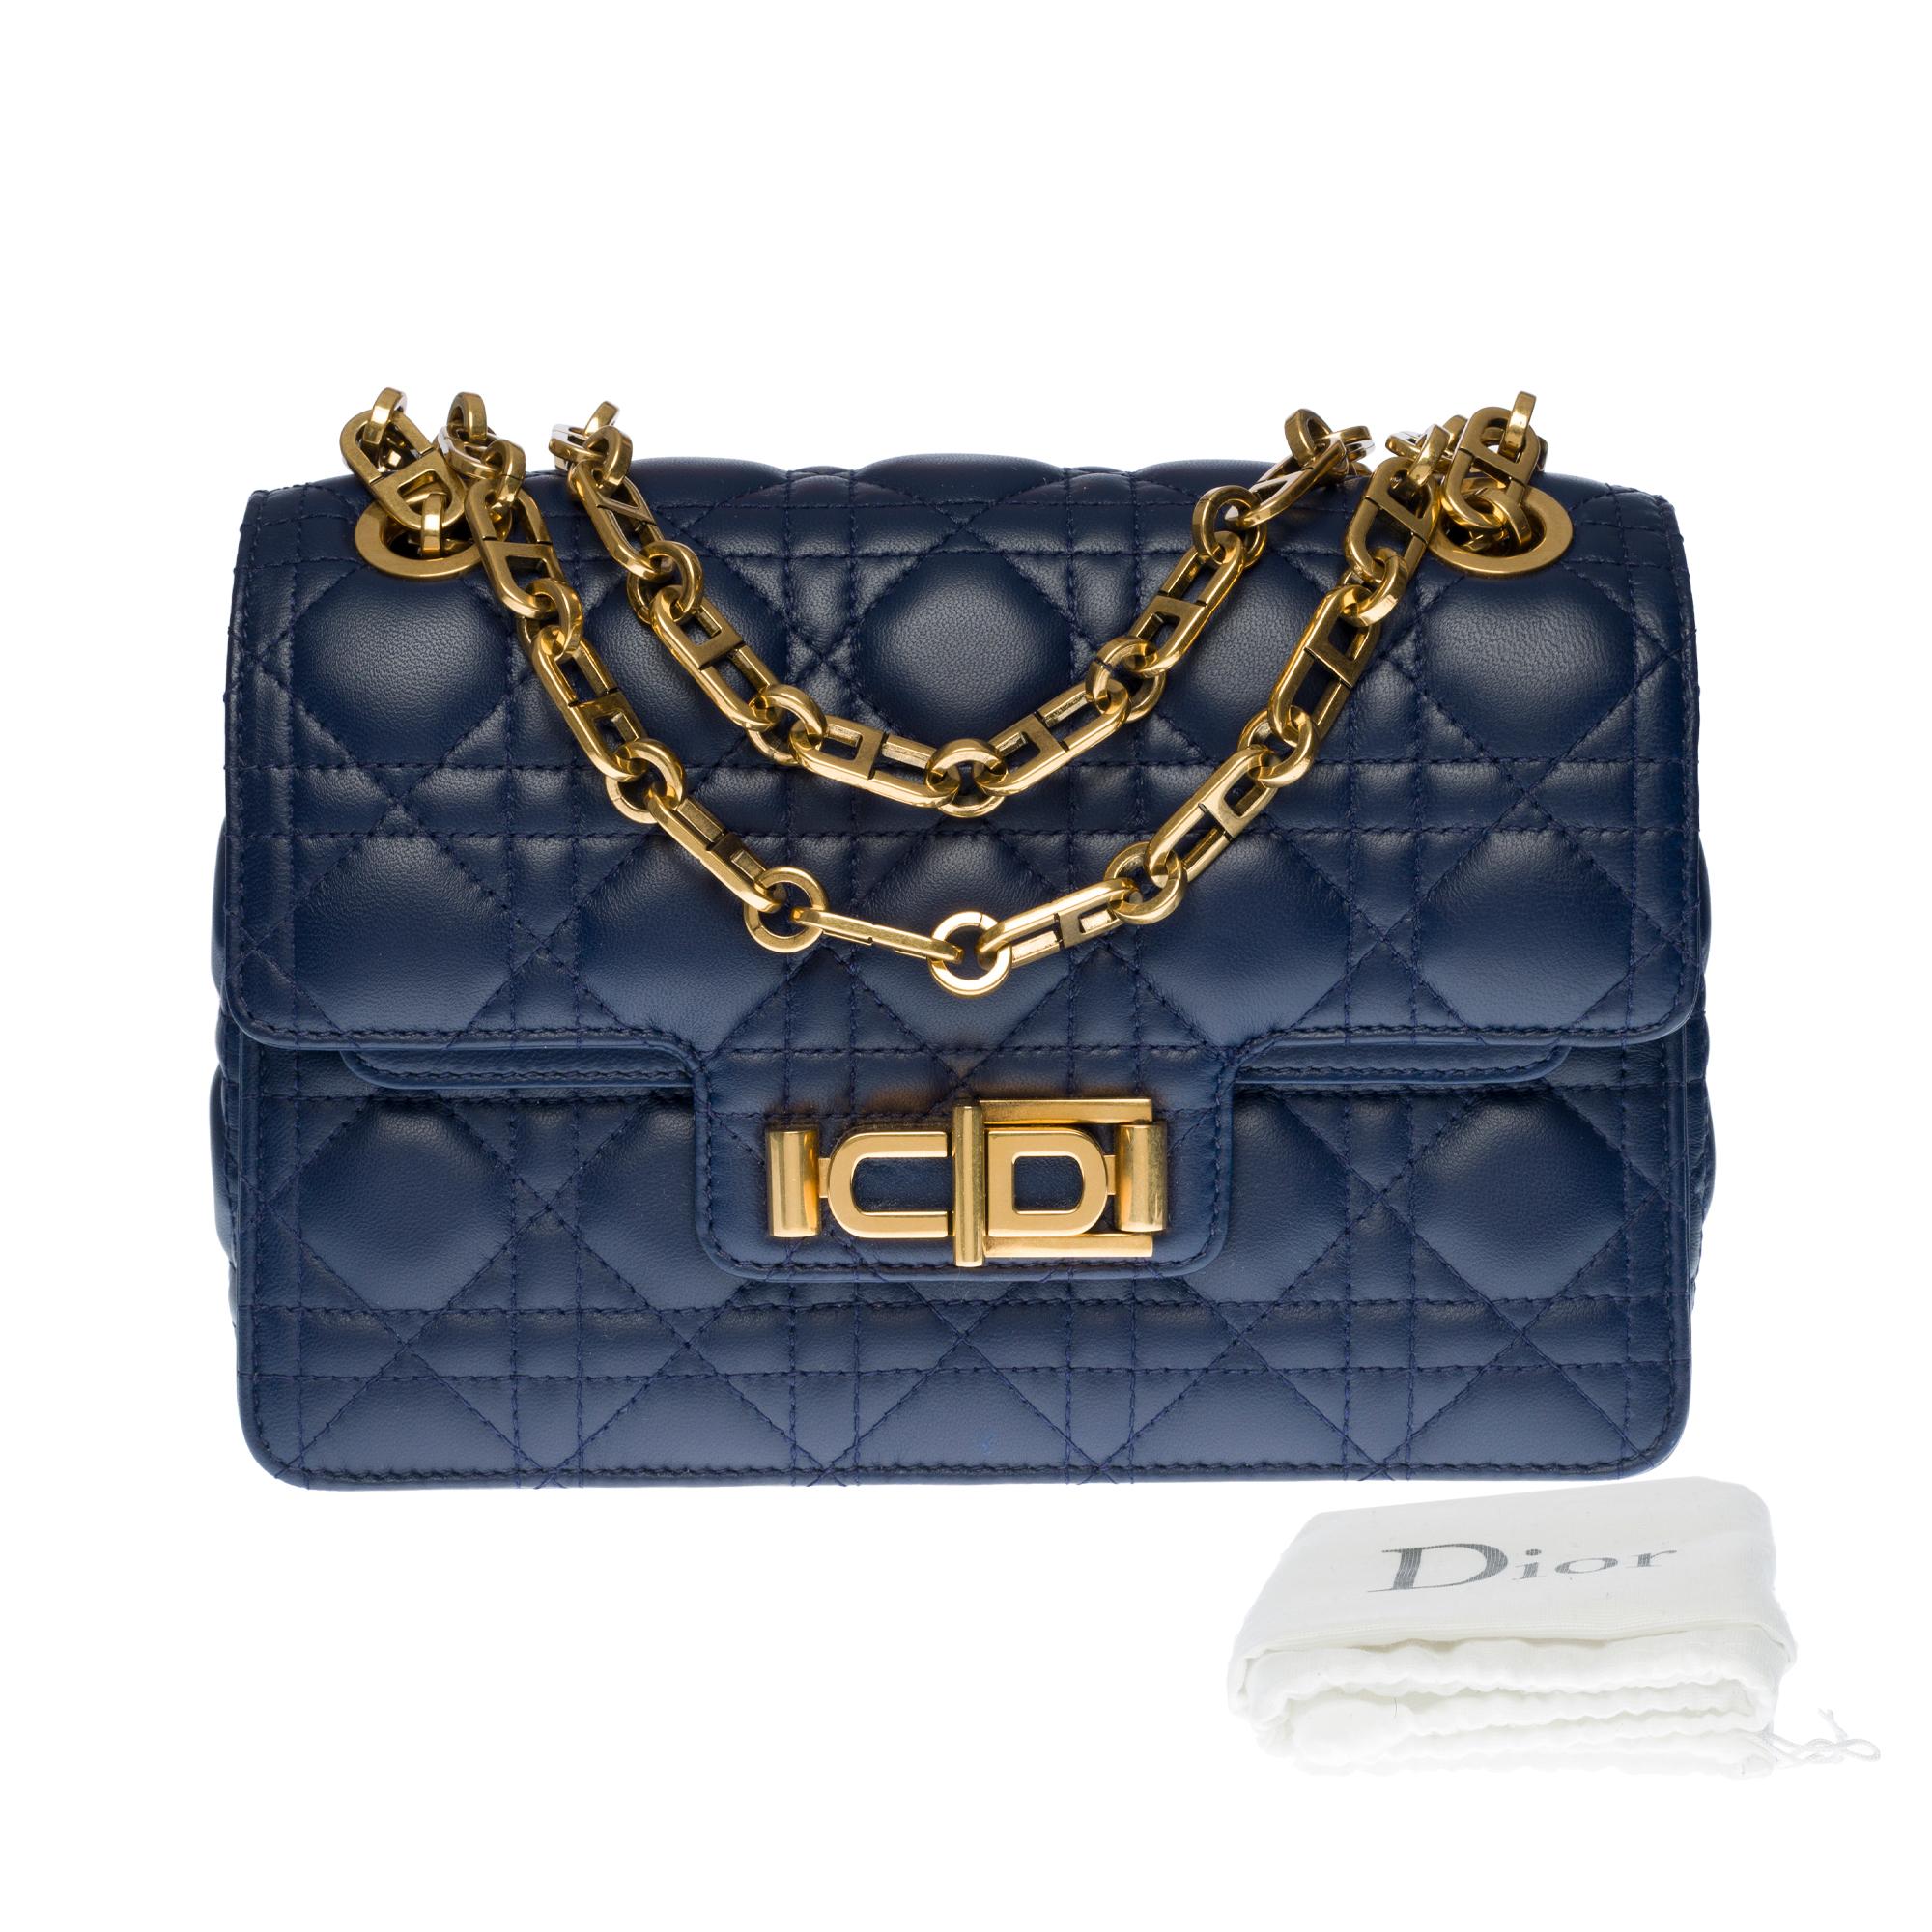 New /Christian Dior Miss Dior Shoulder bag in Navy Blue cannage leather, GHW 2